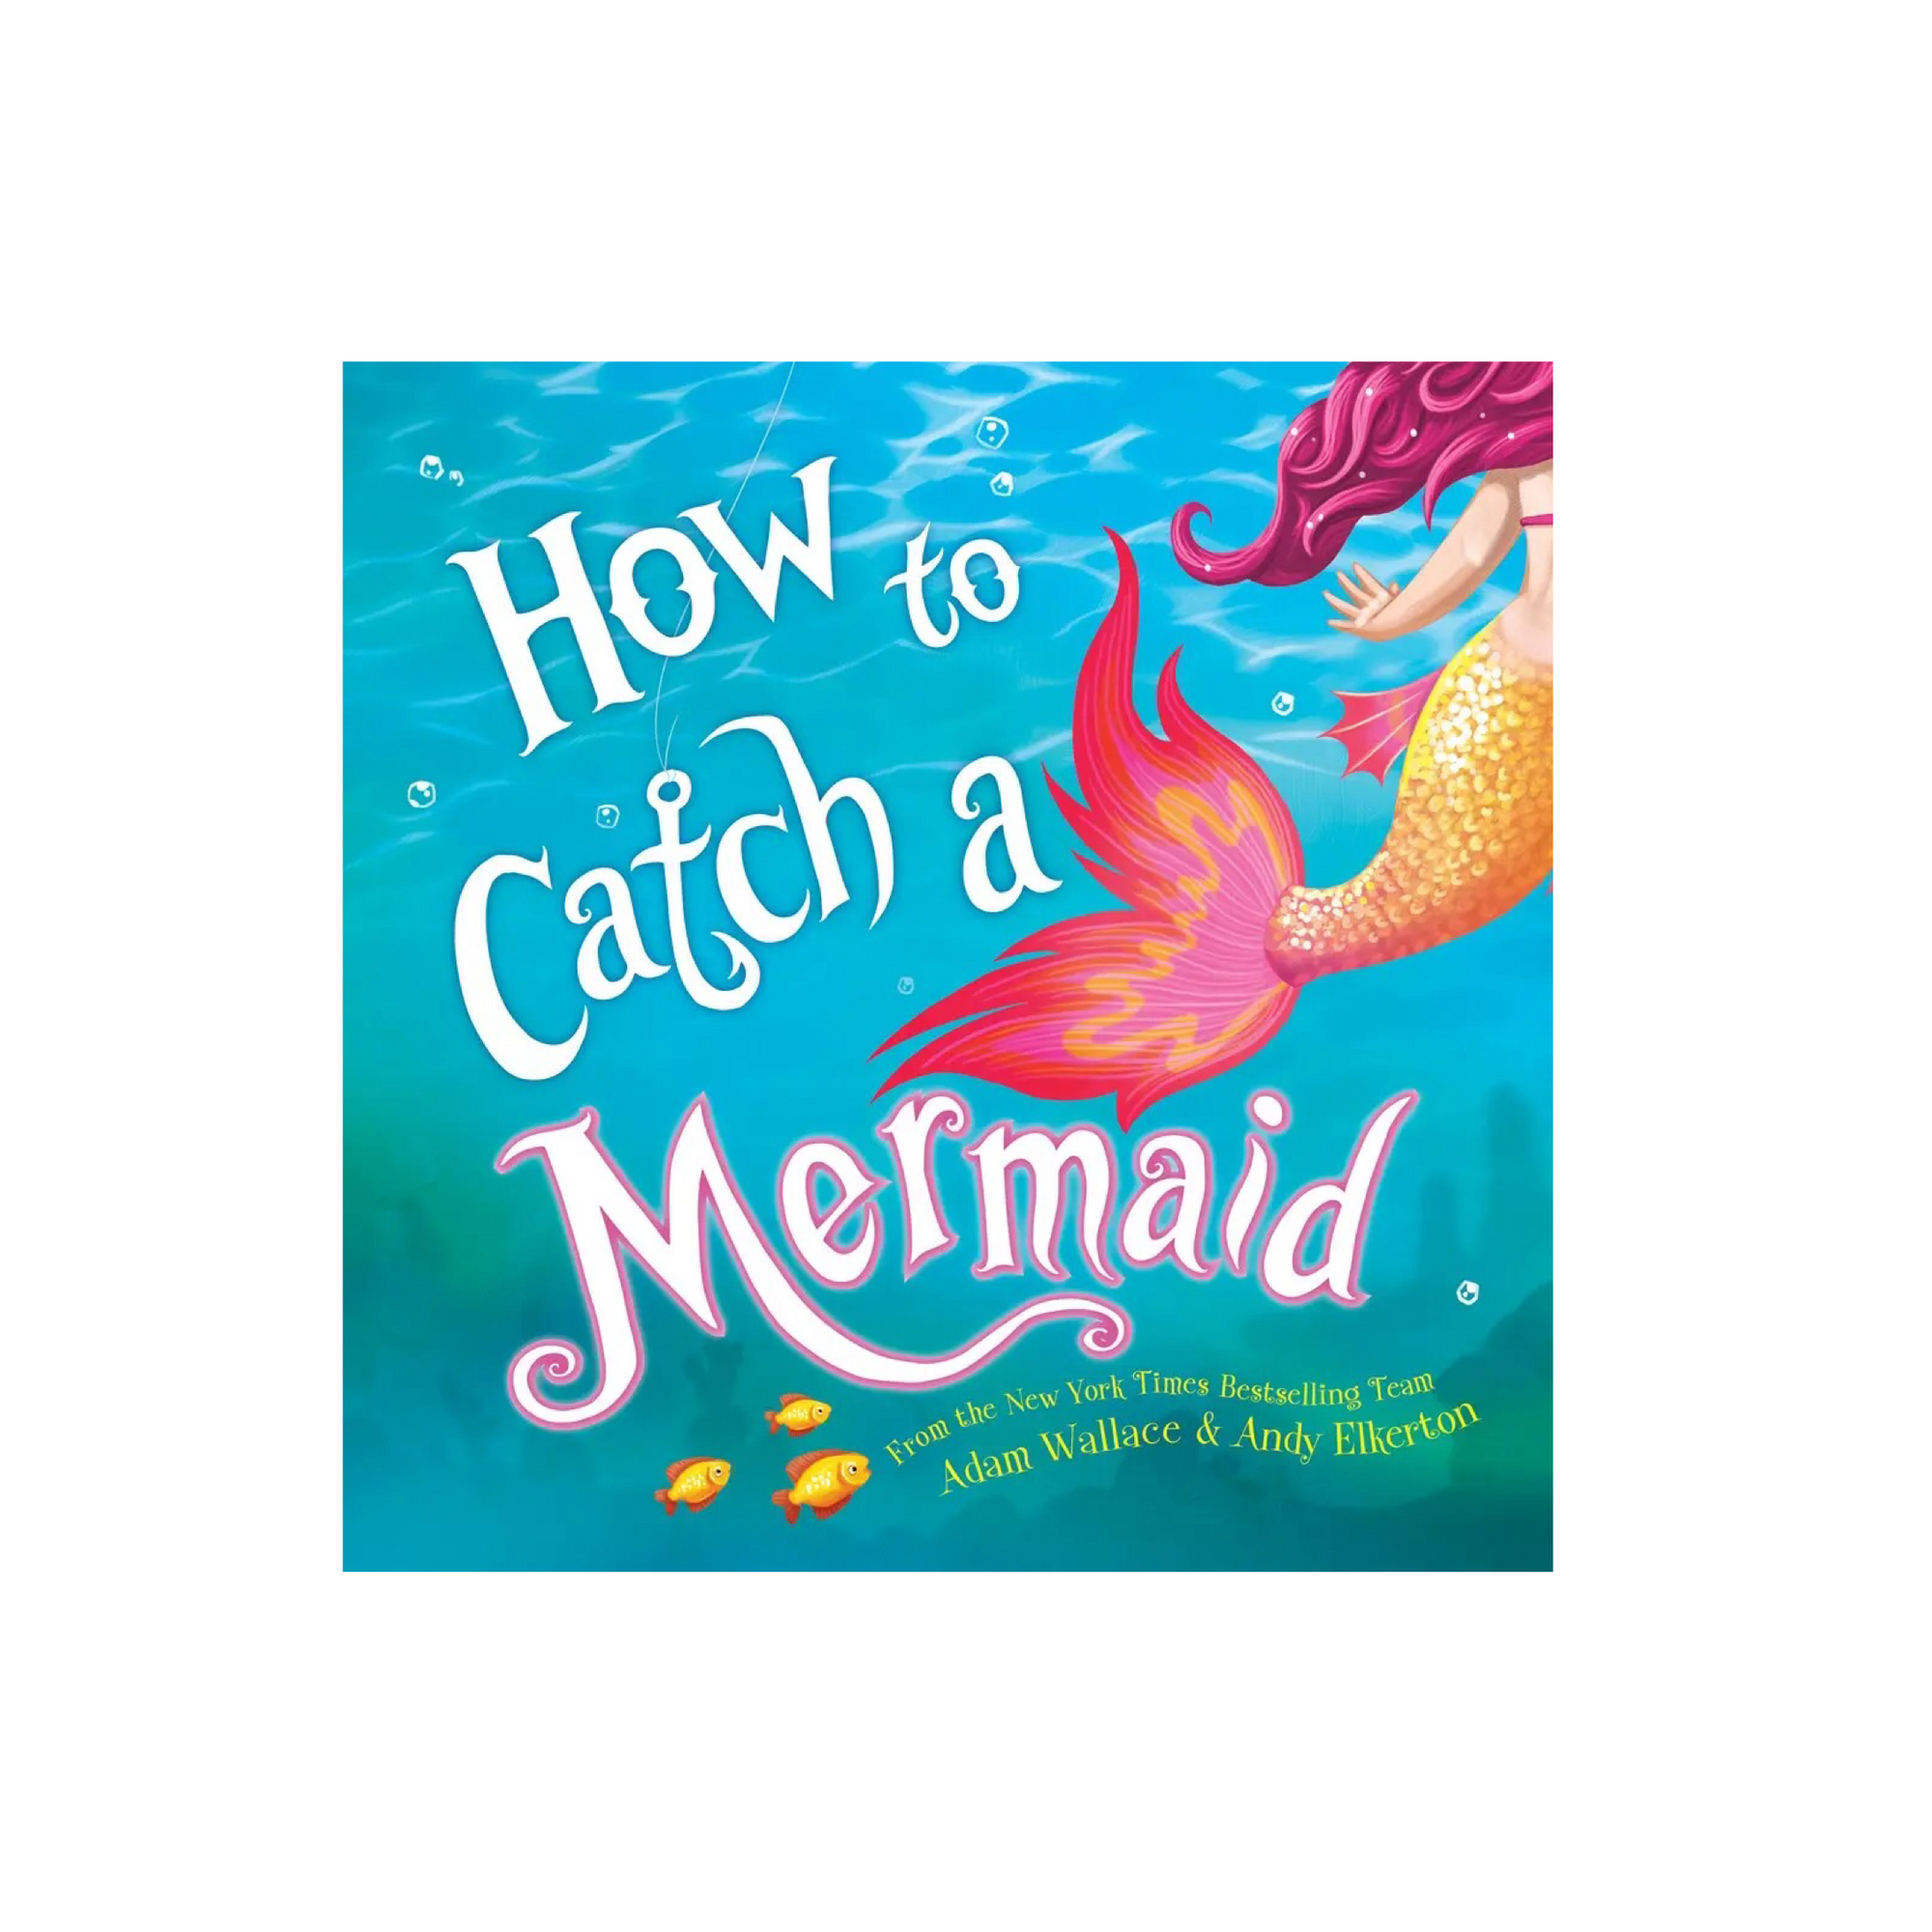 How To Catch A Mermaid